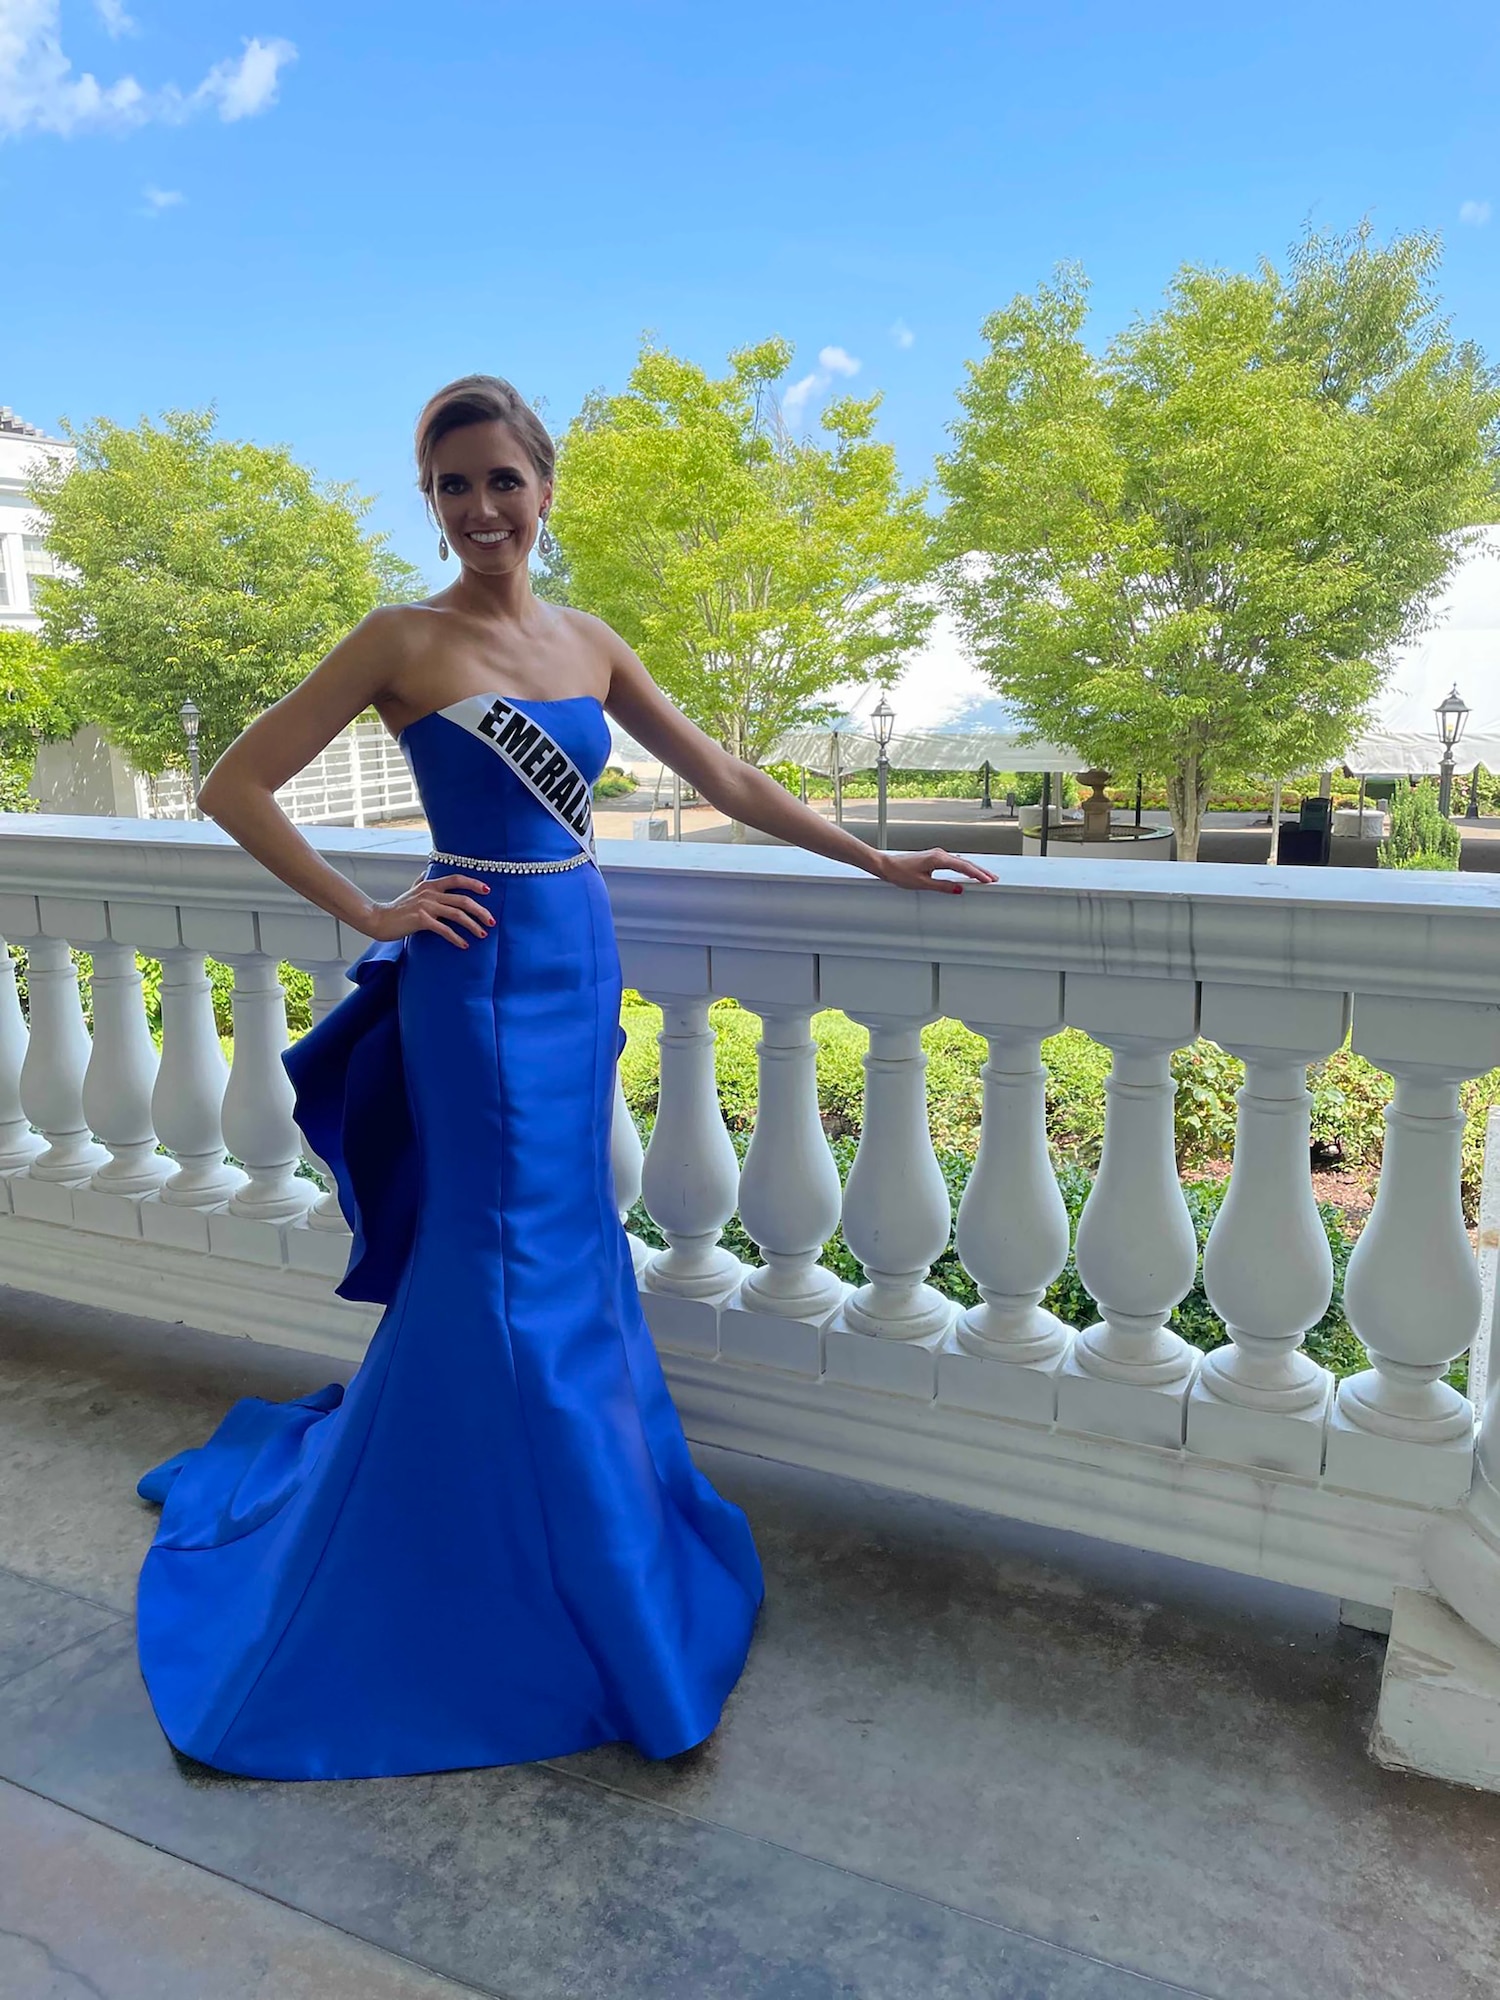 Maj. Samantha Burrill Westman, 28th Intelligence Squadron flight commander, Tactical Systems Operators (TSO) flight, had the opportunity to compete during the February 2021 International United Miss Florida State pageant. From there, she qualified in July to compete at the 2021 Nationals in New Jersey as National United Ms. Emerald Coast.